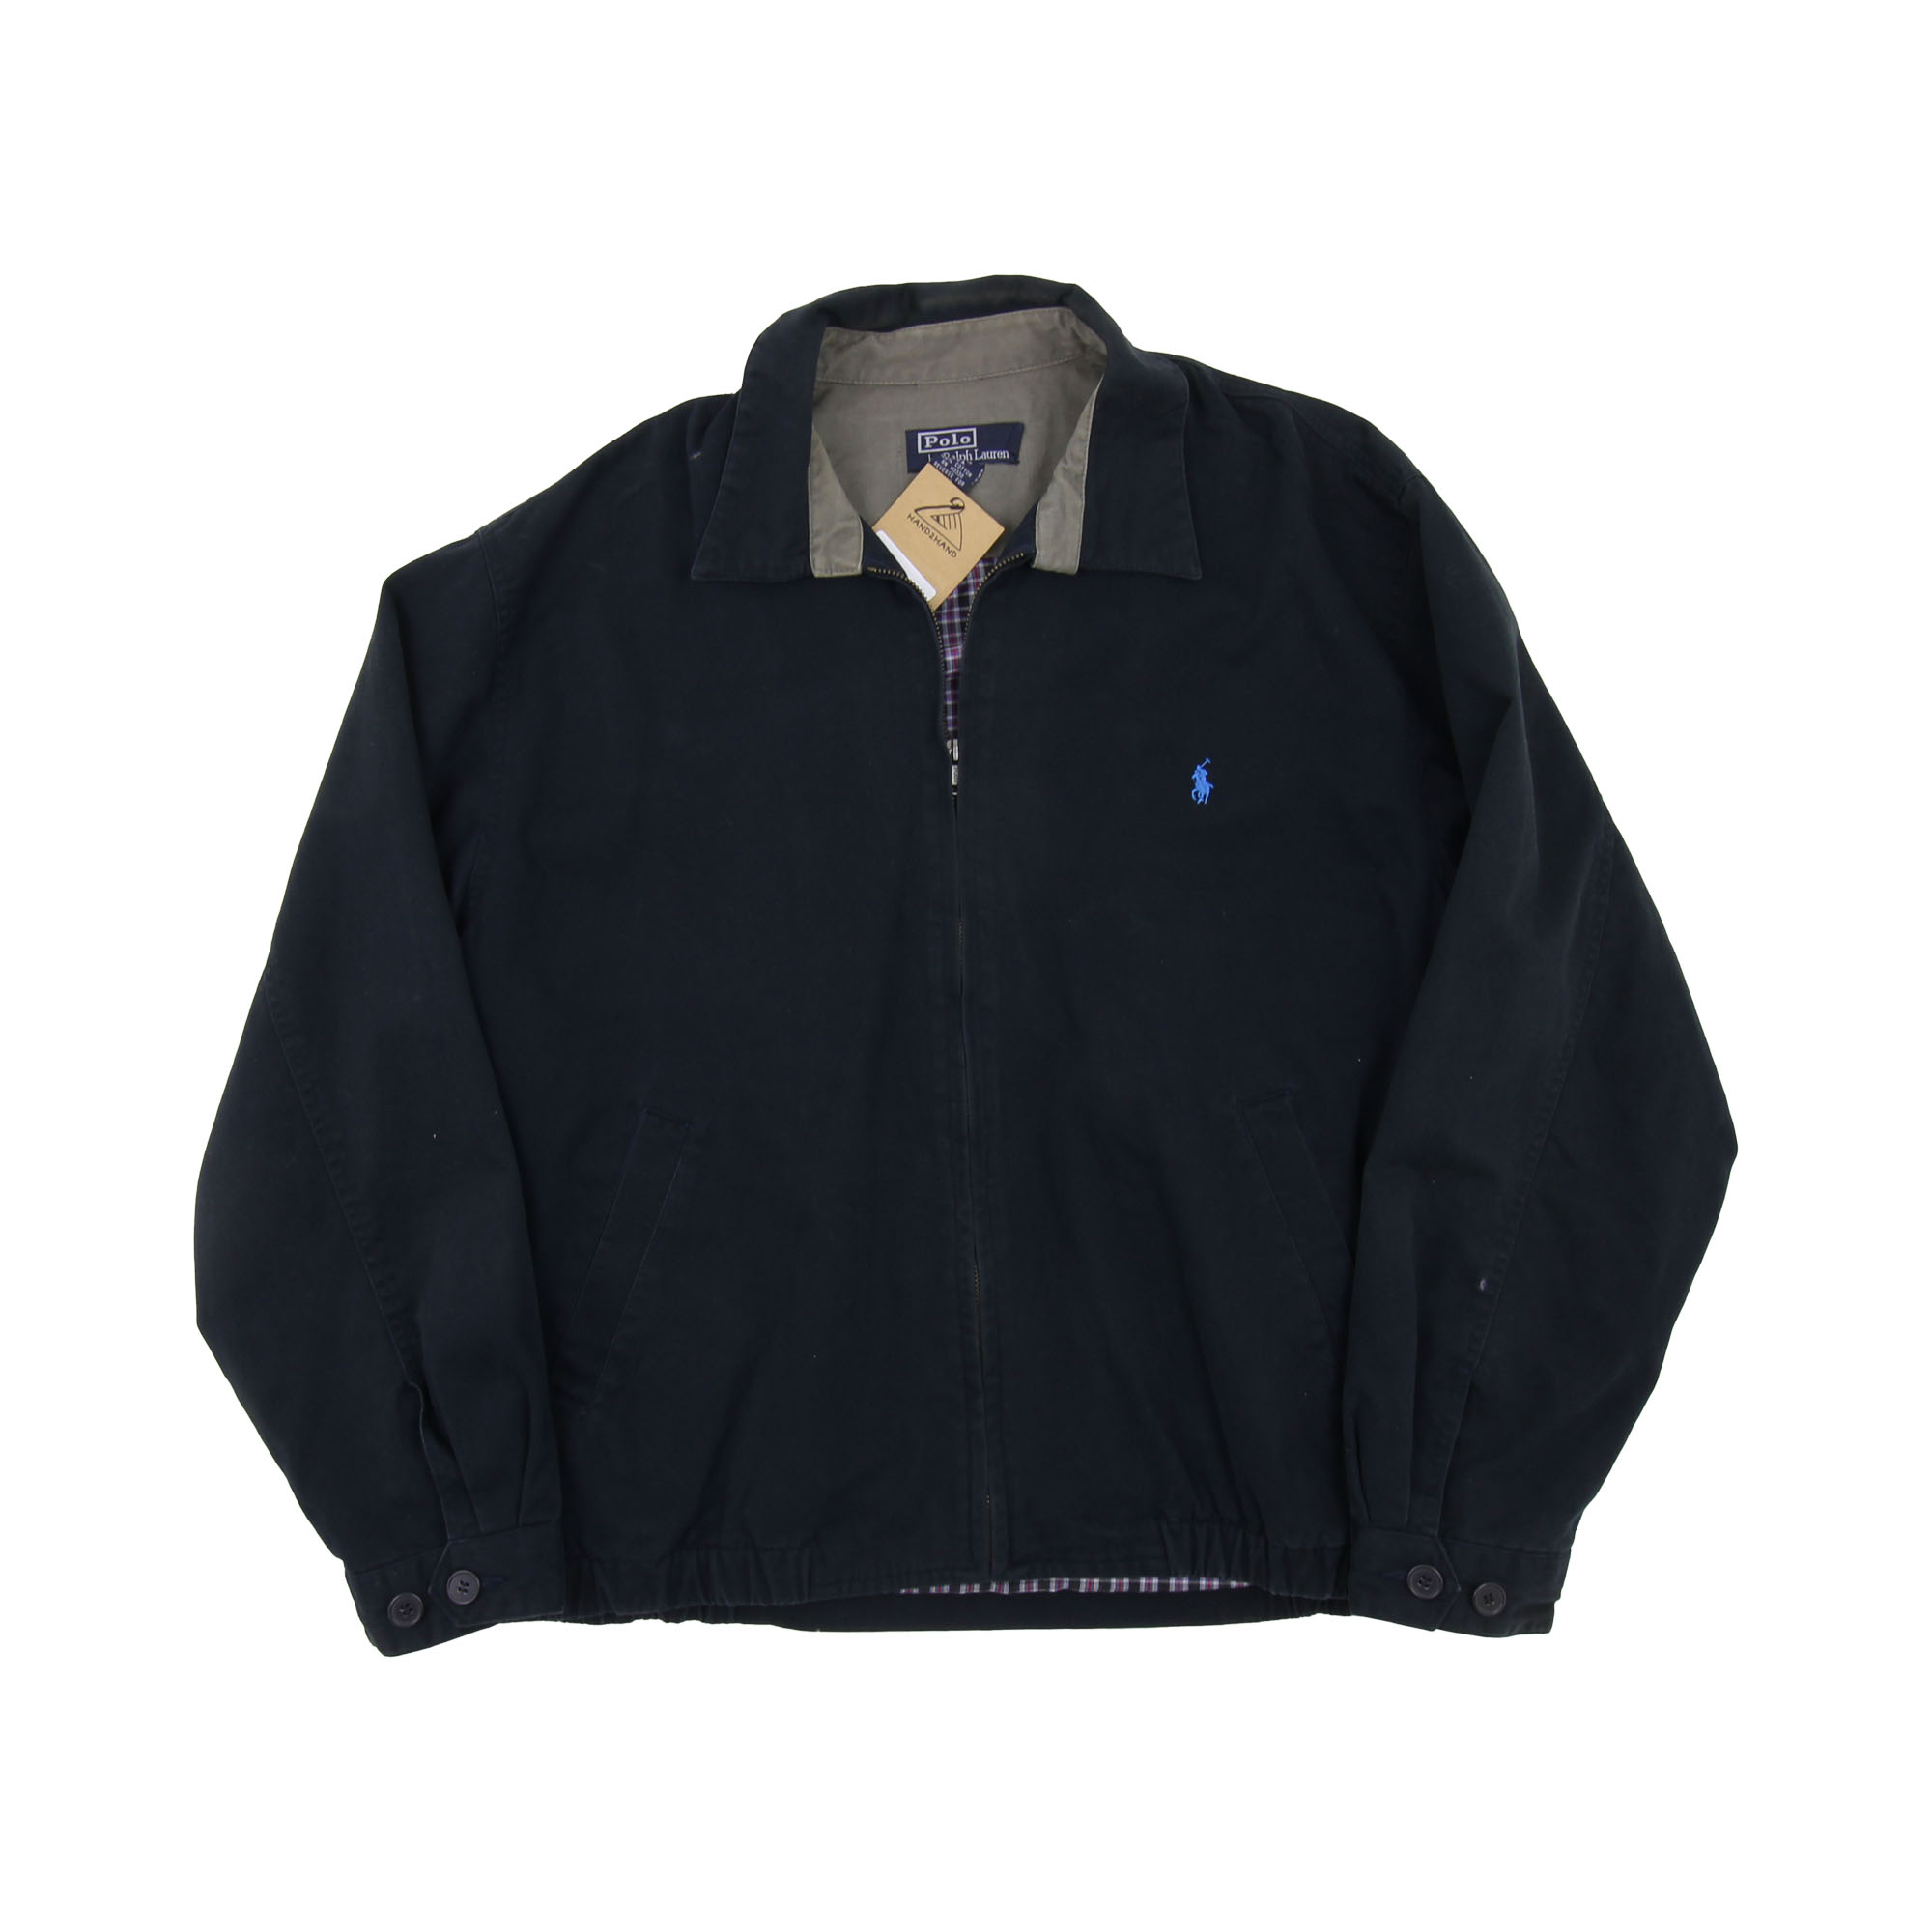 Polo Ralph Lauren Embroidered Logo Thin Jacket -  M/L